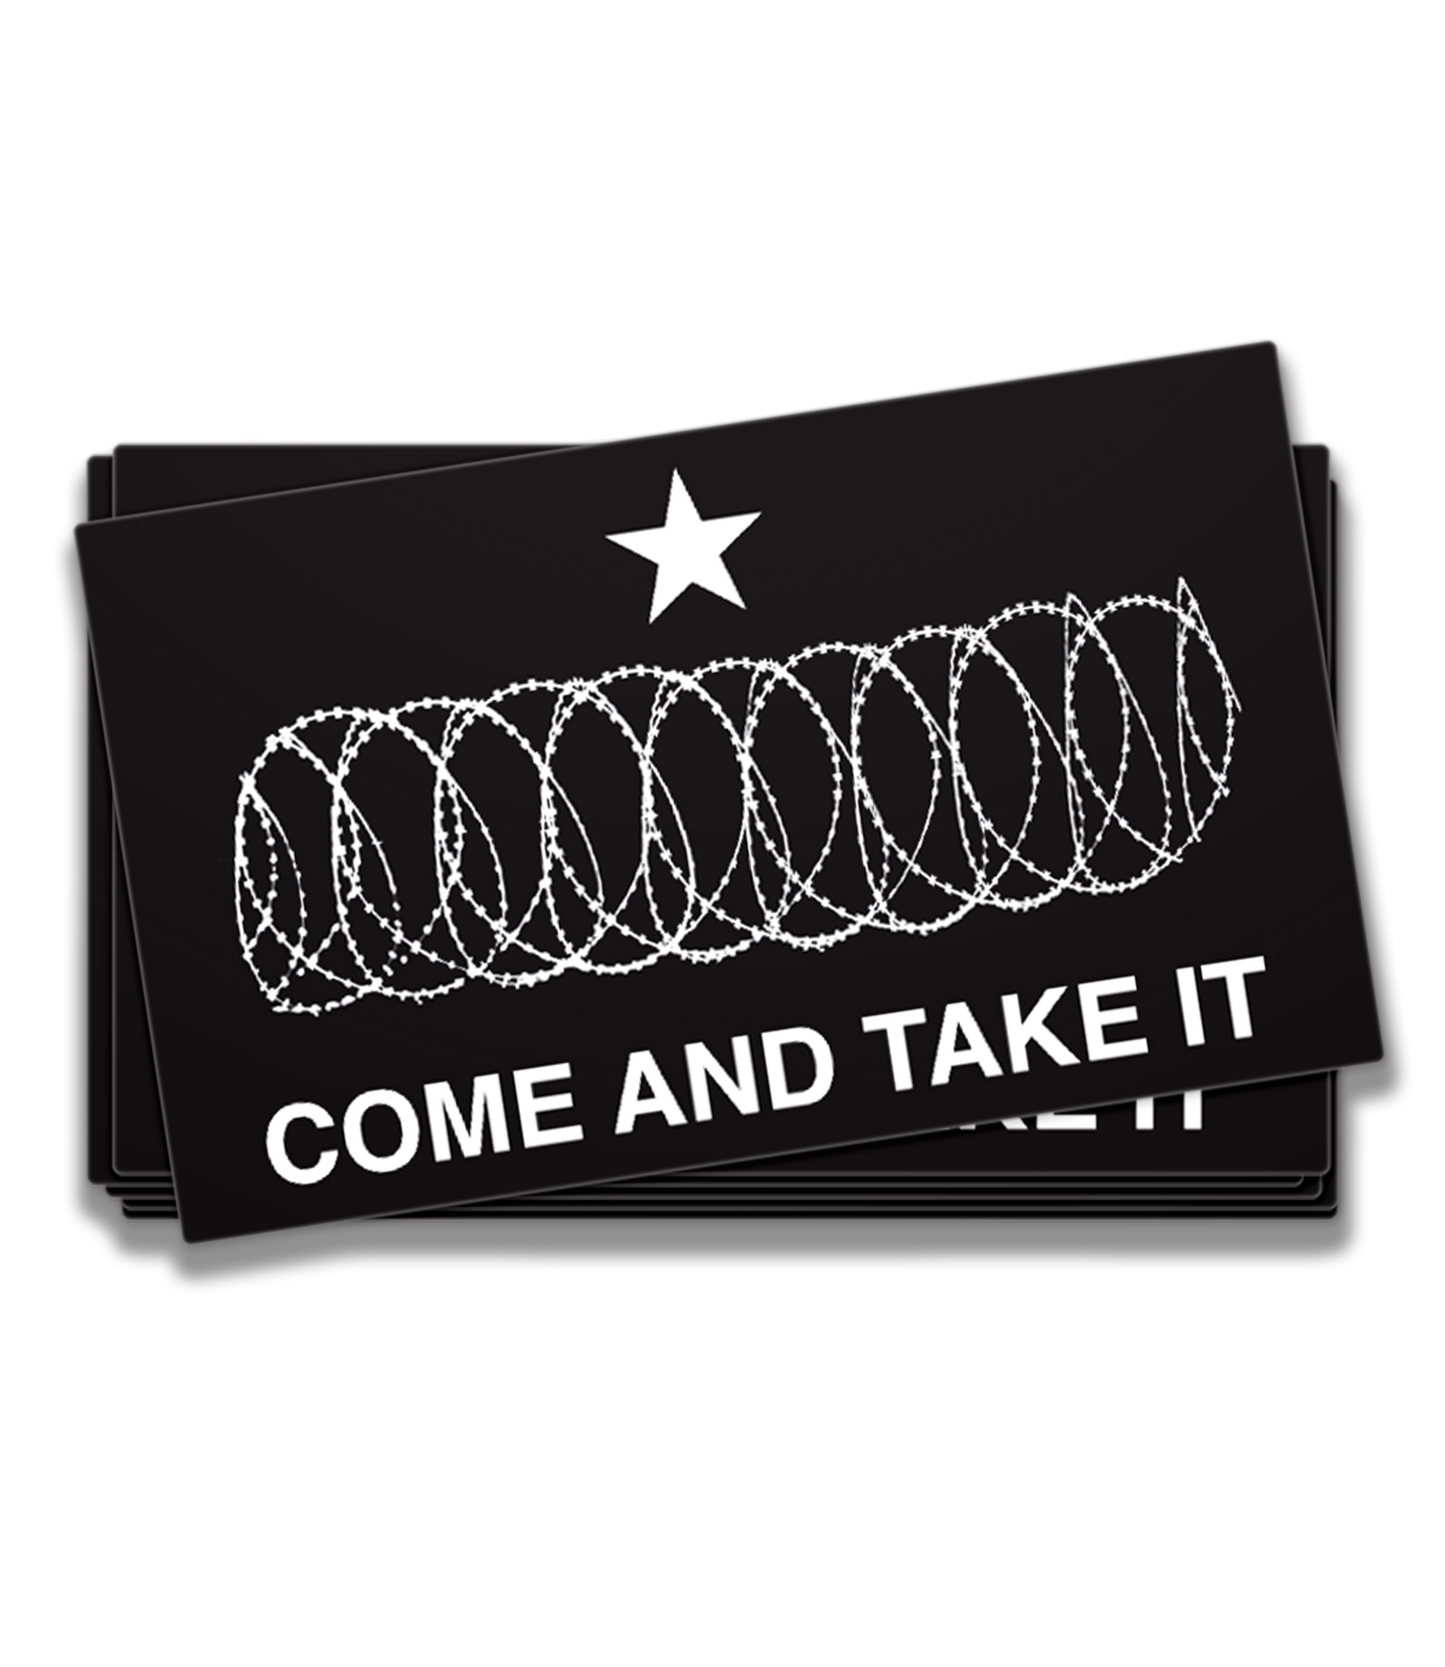 Come And Take It Decal